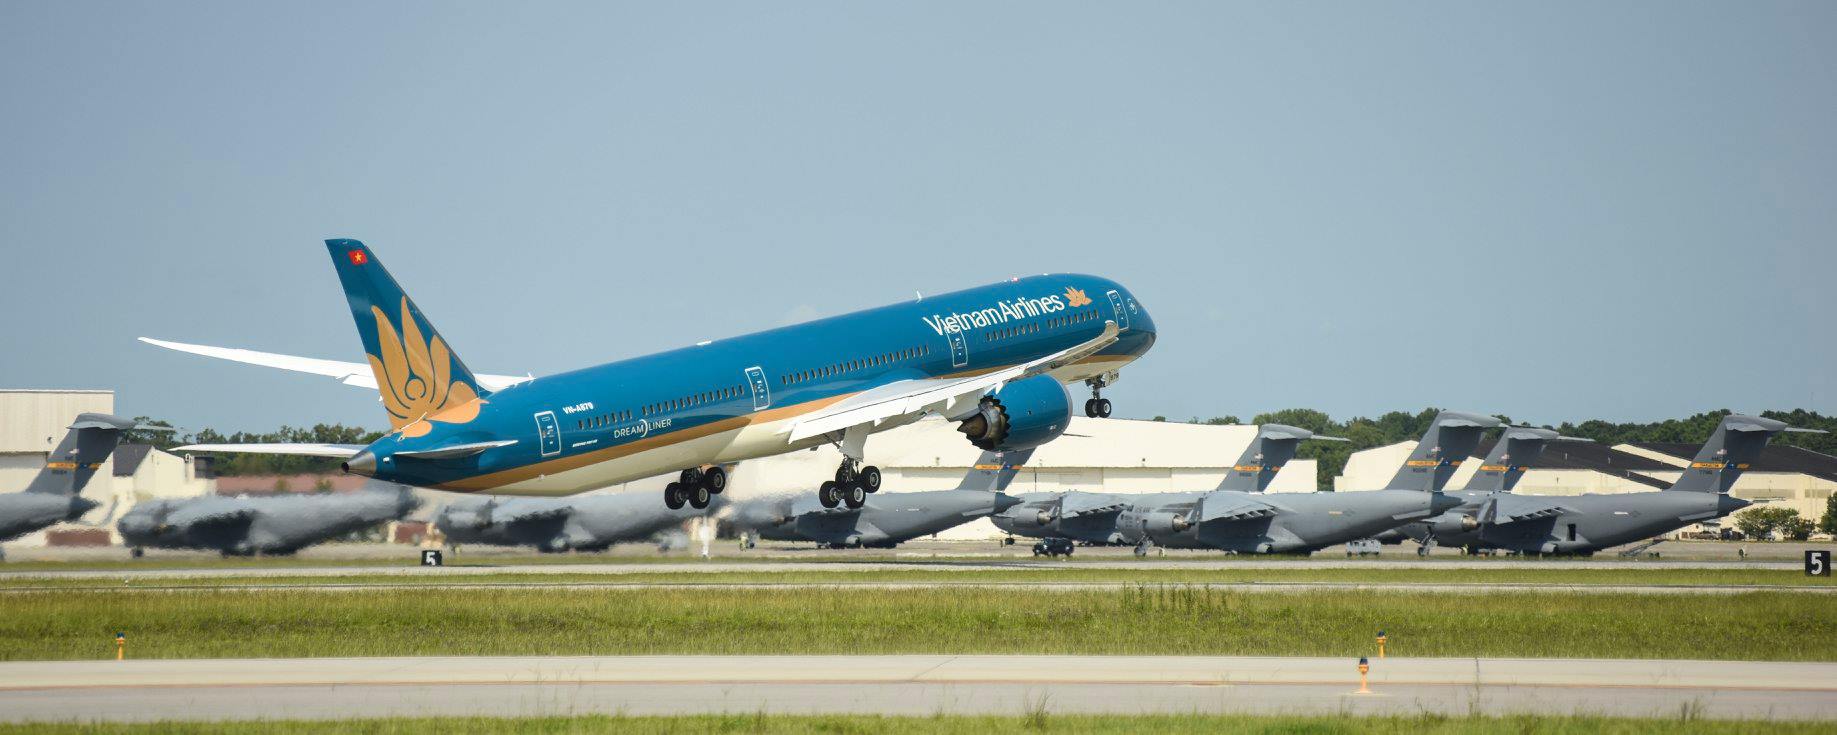 Vietnam Airlines signs EngineWise Service Agreement With Pratt & Whitney